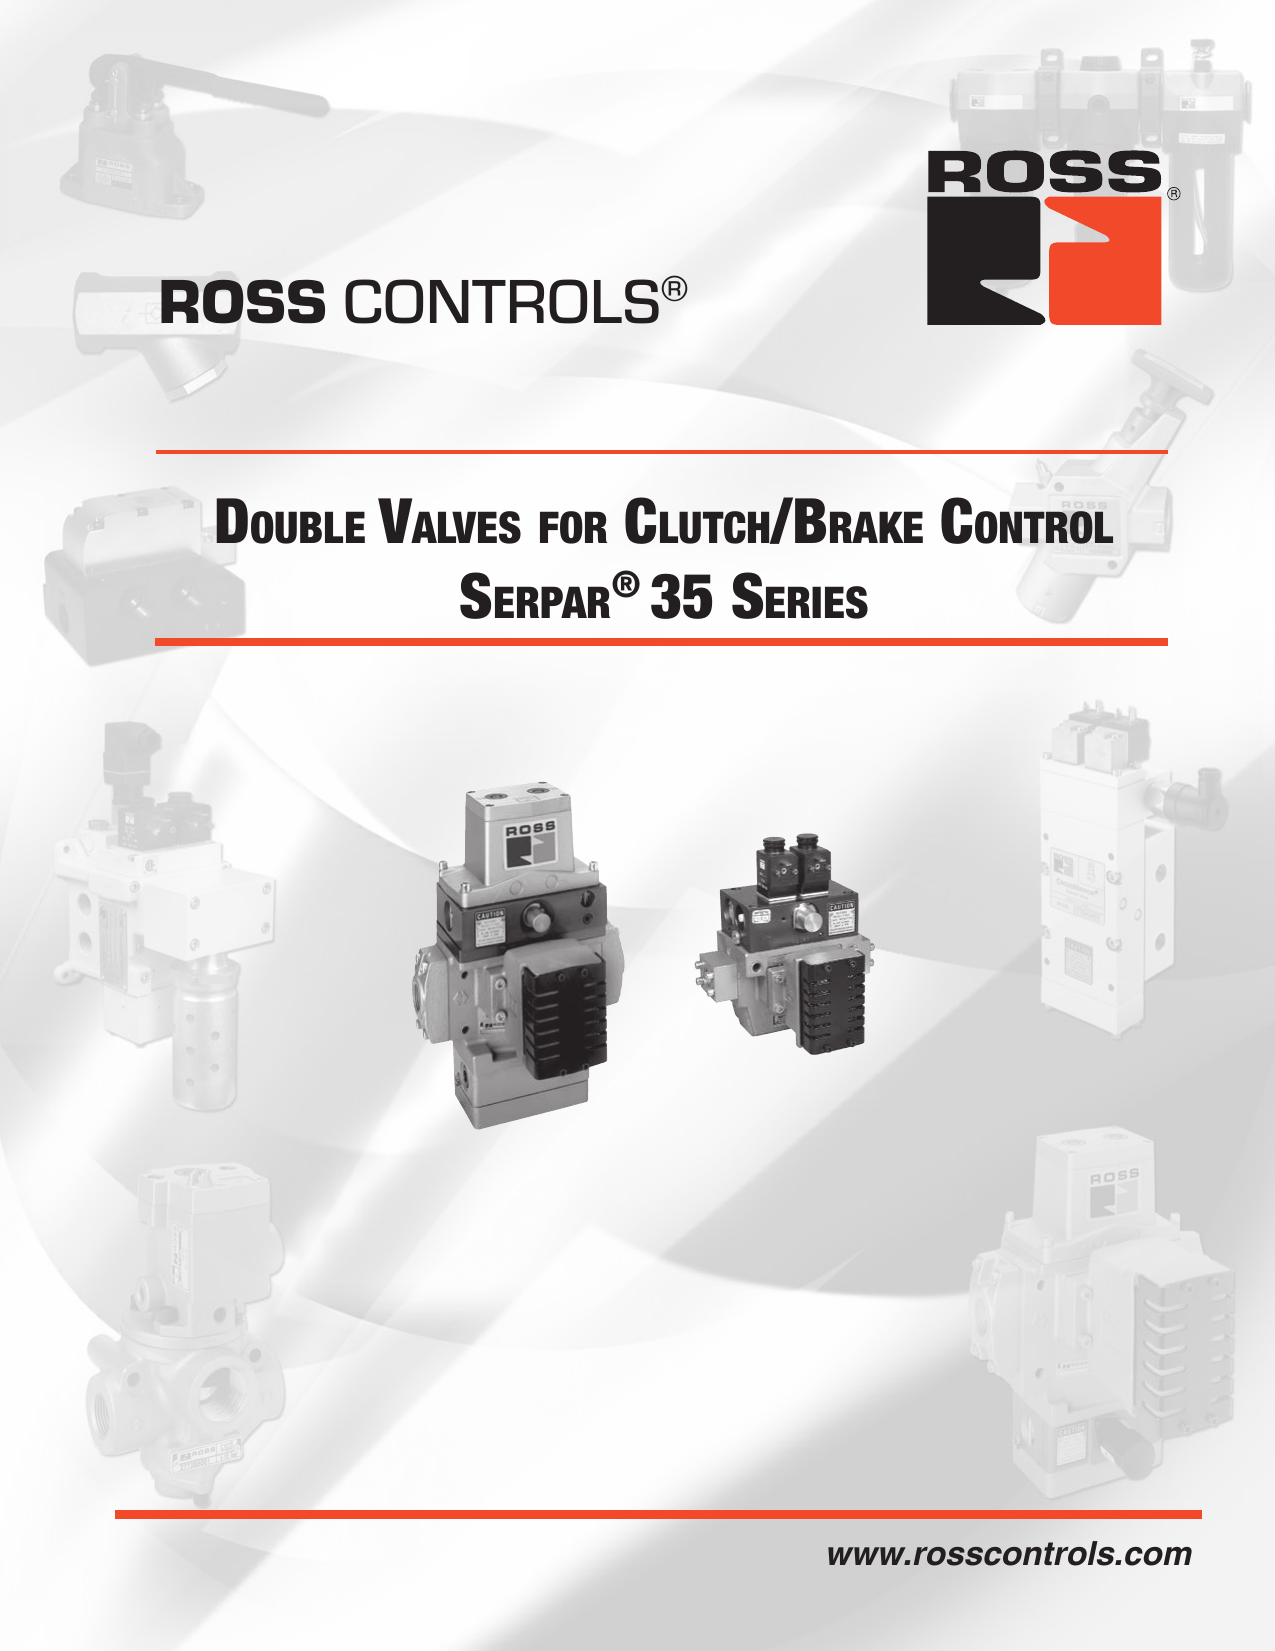 Dynamic Monitoring L-G Monitor Type Ports 3/4 NPT 110 VAC Ports 3/4 NPT 110 VAC Ross Controls 3573D5216Z 35/SERPAR Series Solenoid Controlled Valve Dynamic Memory Remote Reset Left Inlet 